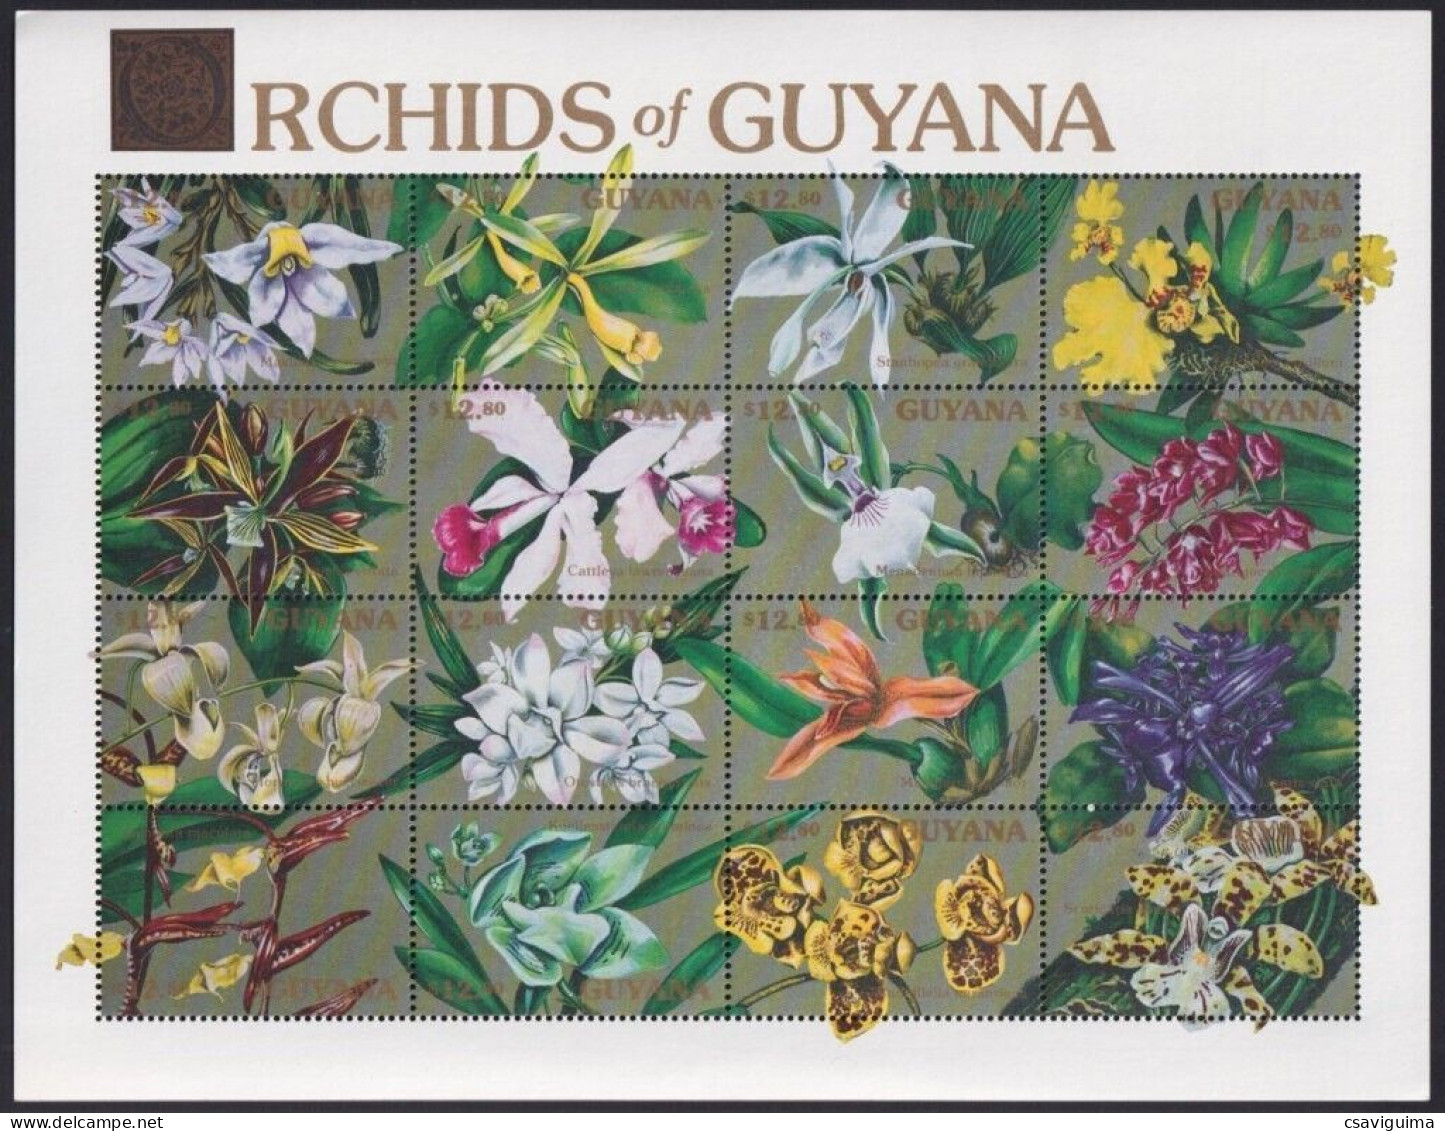 Guyana - 1991 - Flowers: Orchids Of Guyana - Yv 2651/66 - Orchids